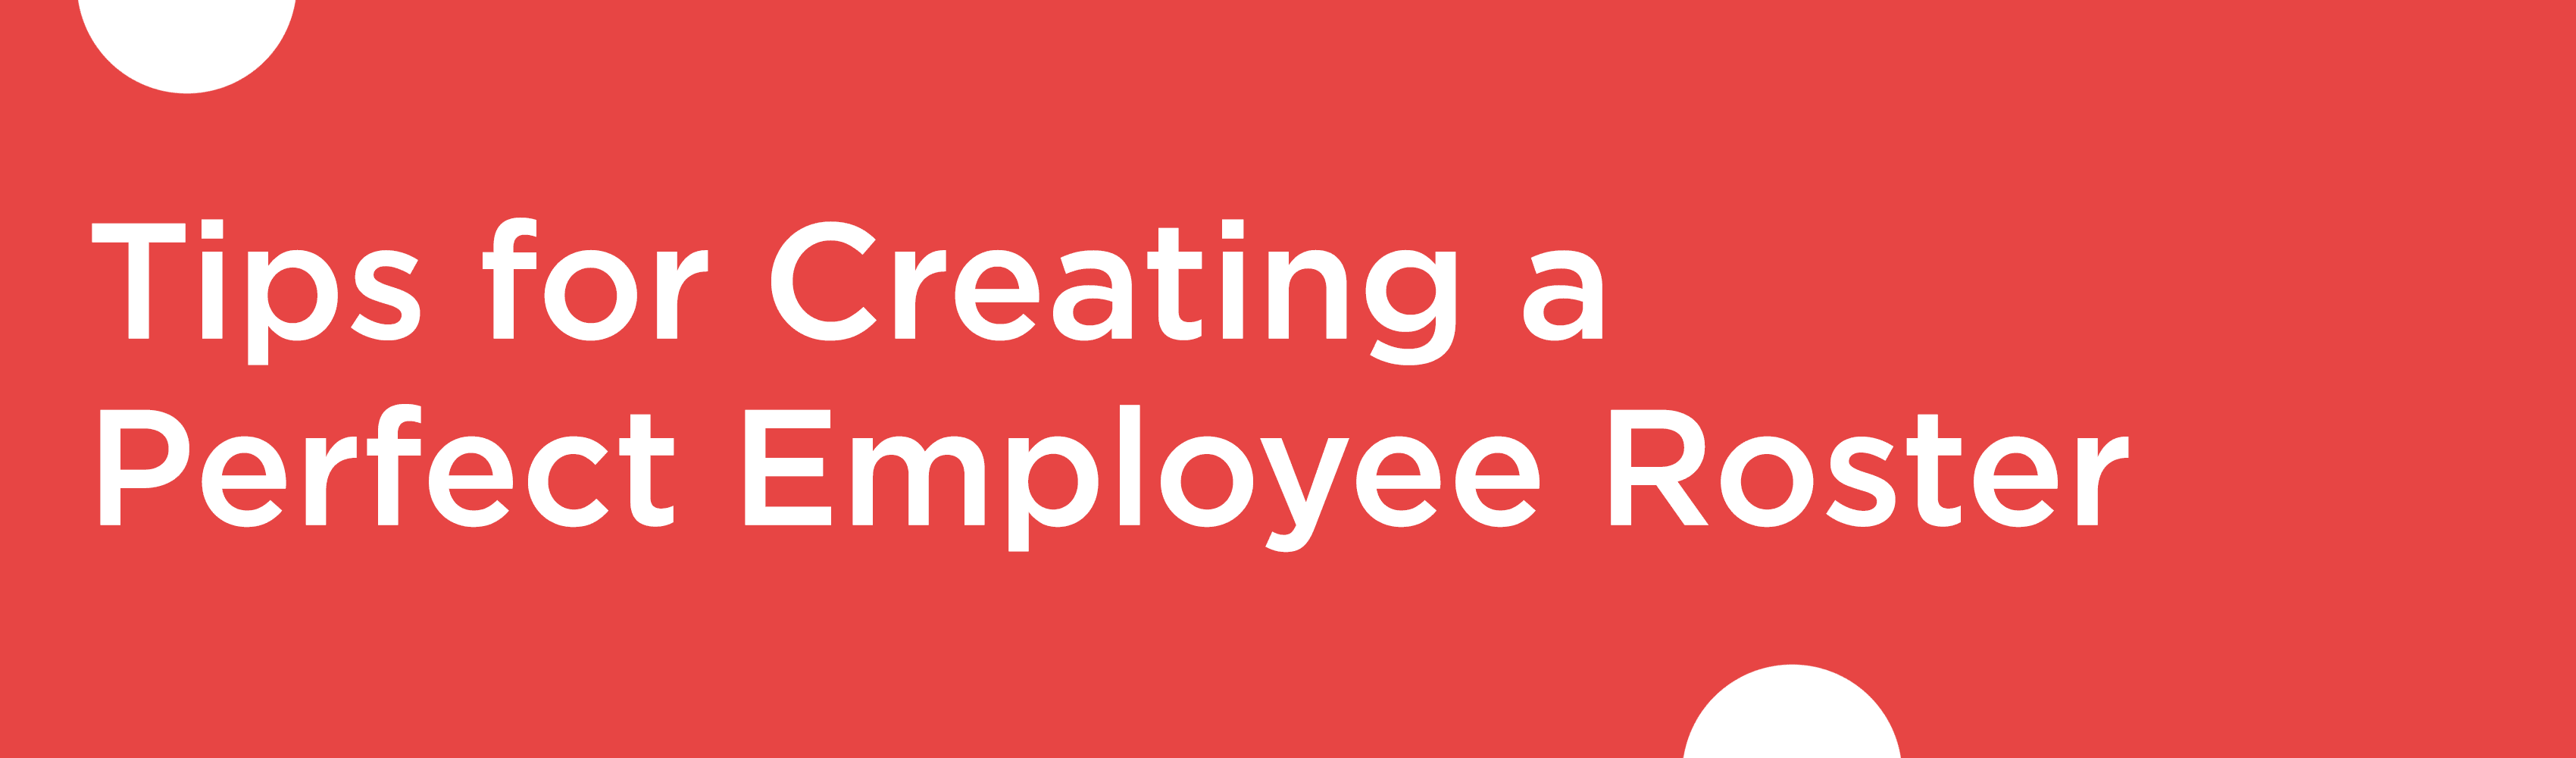 Tips for Creating a Perfect Employee Roster